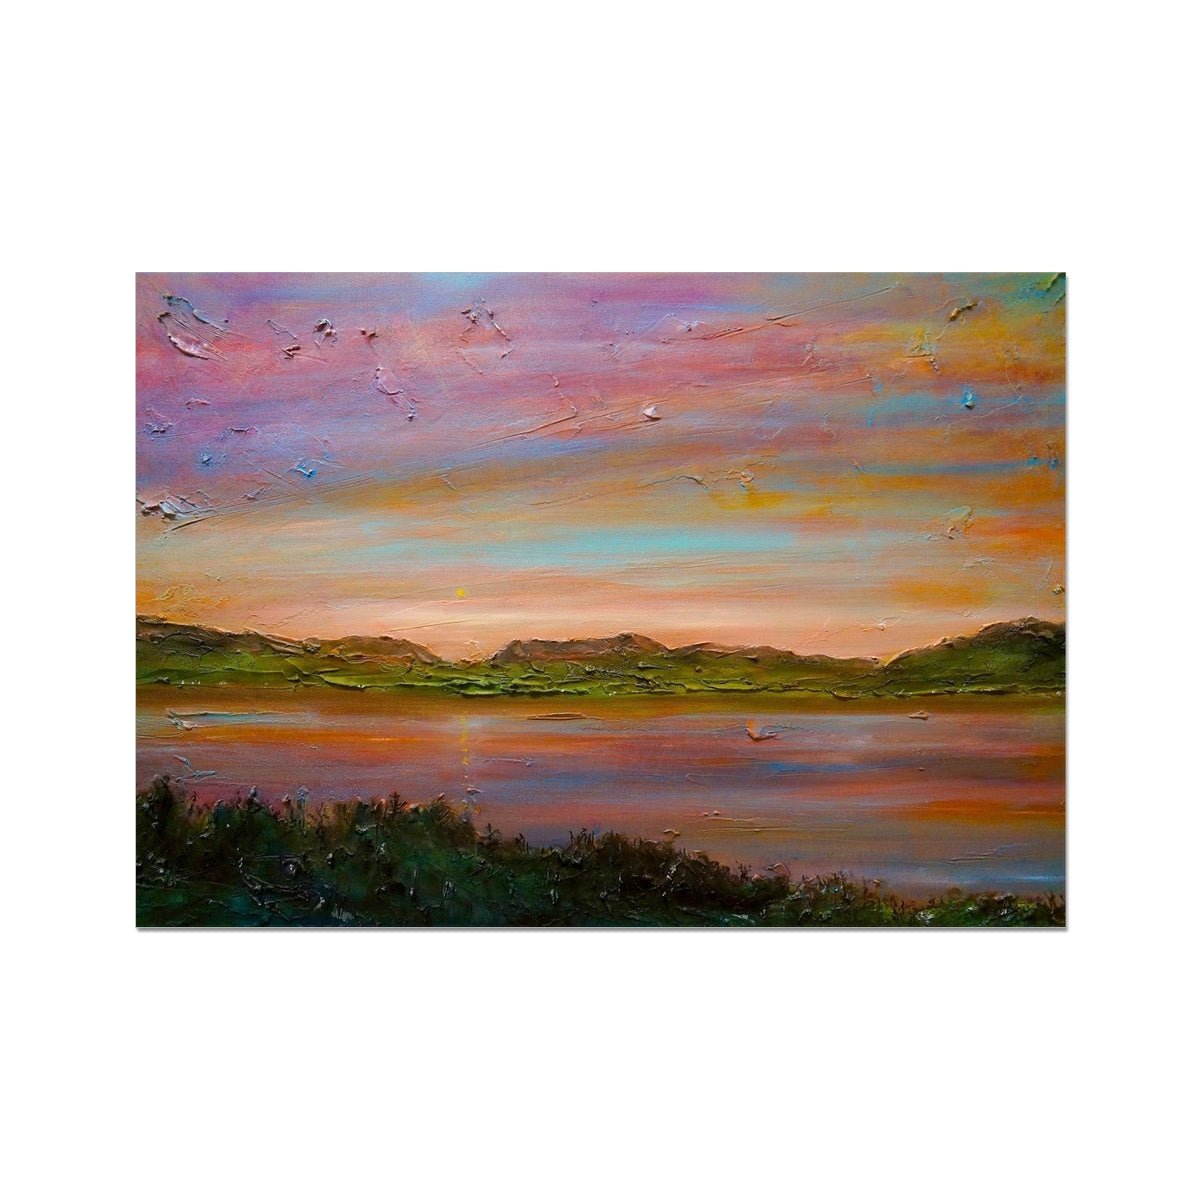 Gourock Golf Club Sunset Painting | Fine Art Prints From Scotland-Unframed Prints-River Clyde Art Gallery-A2 Landscape-Paintings, Prints, Homeware, Art Gifts From Scotland By Scottish Artist Kevin Hunter